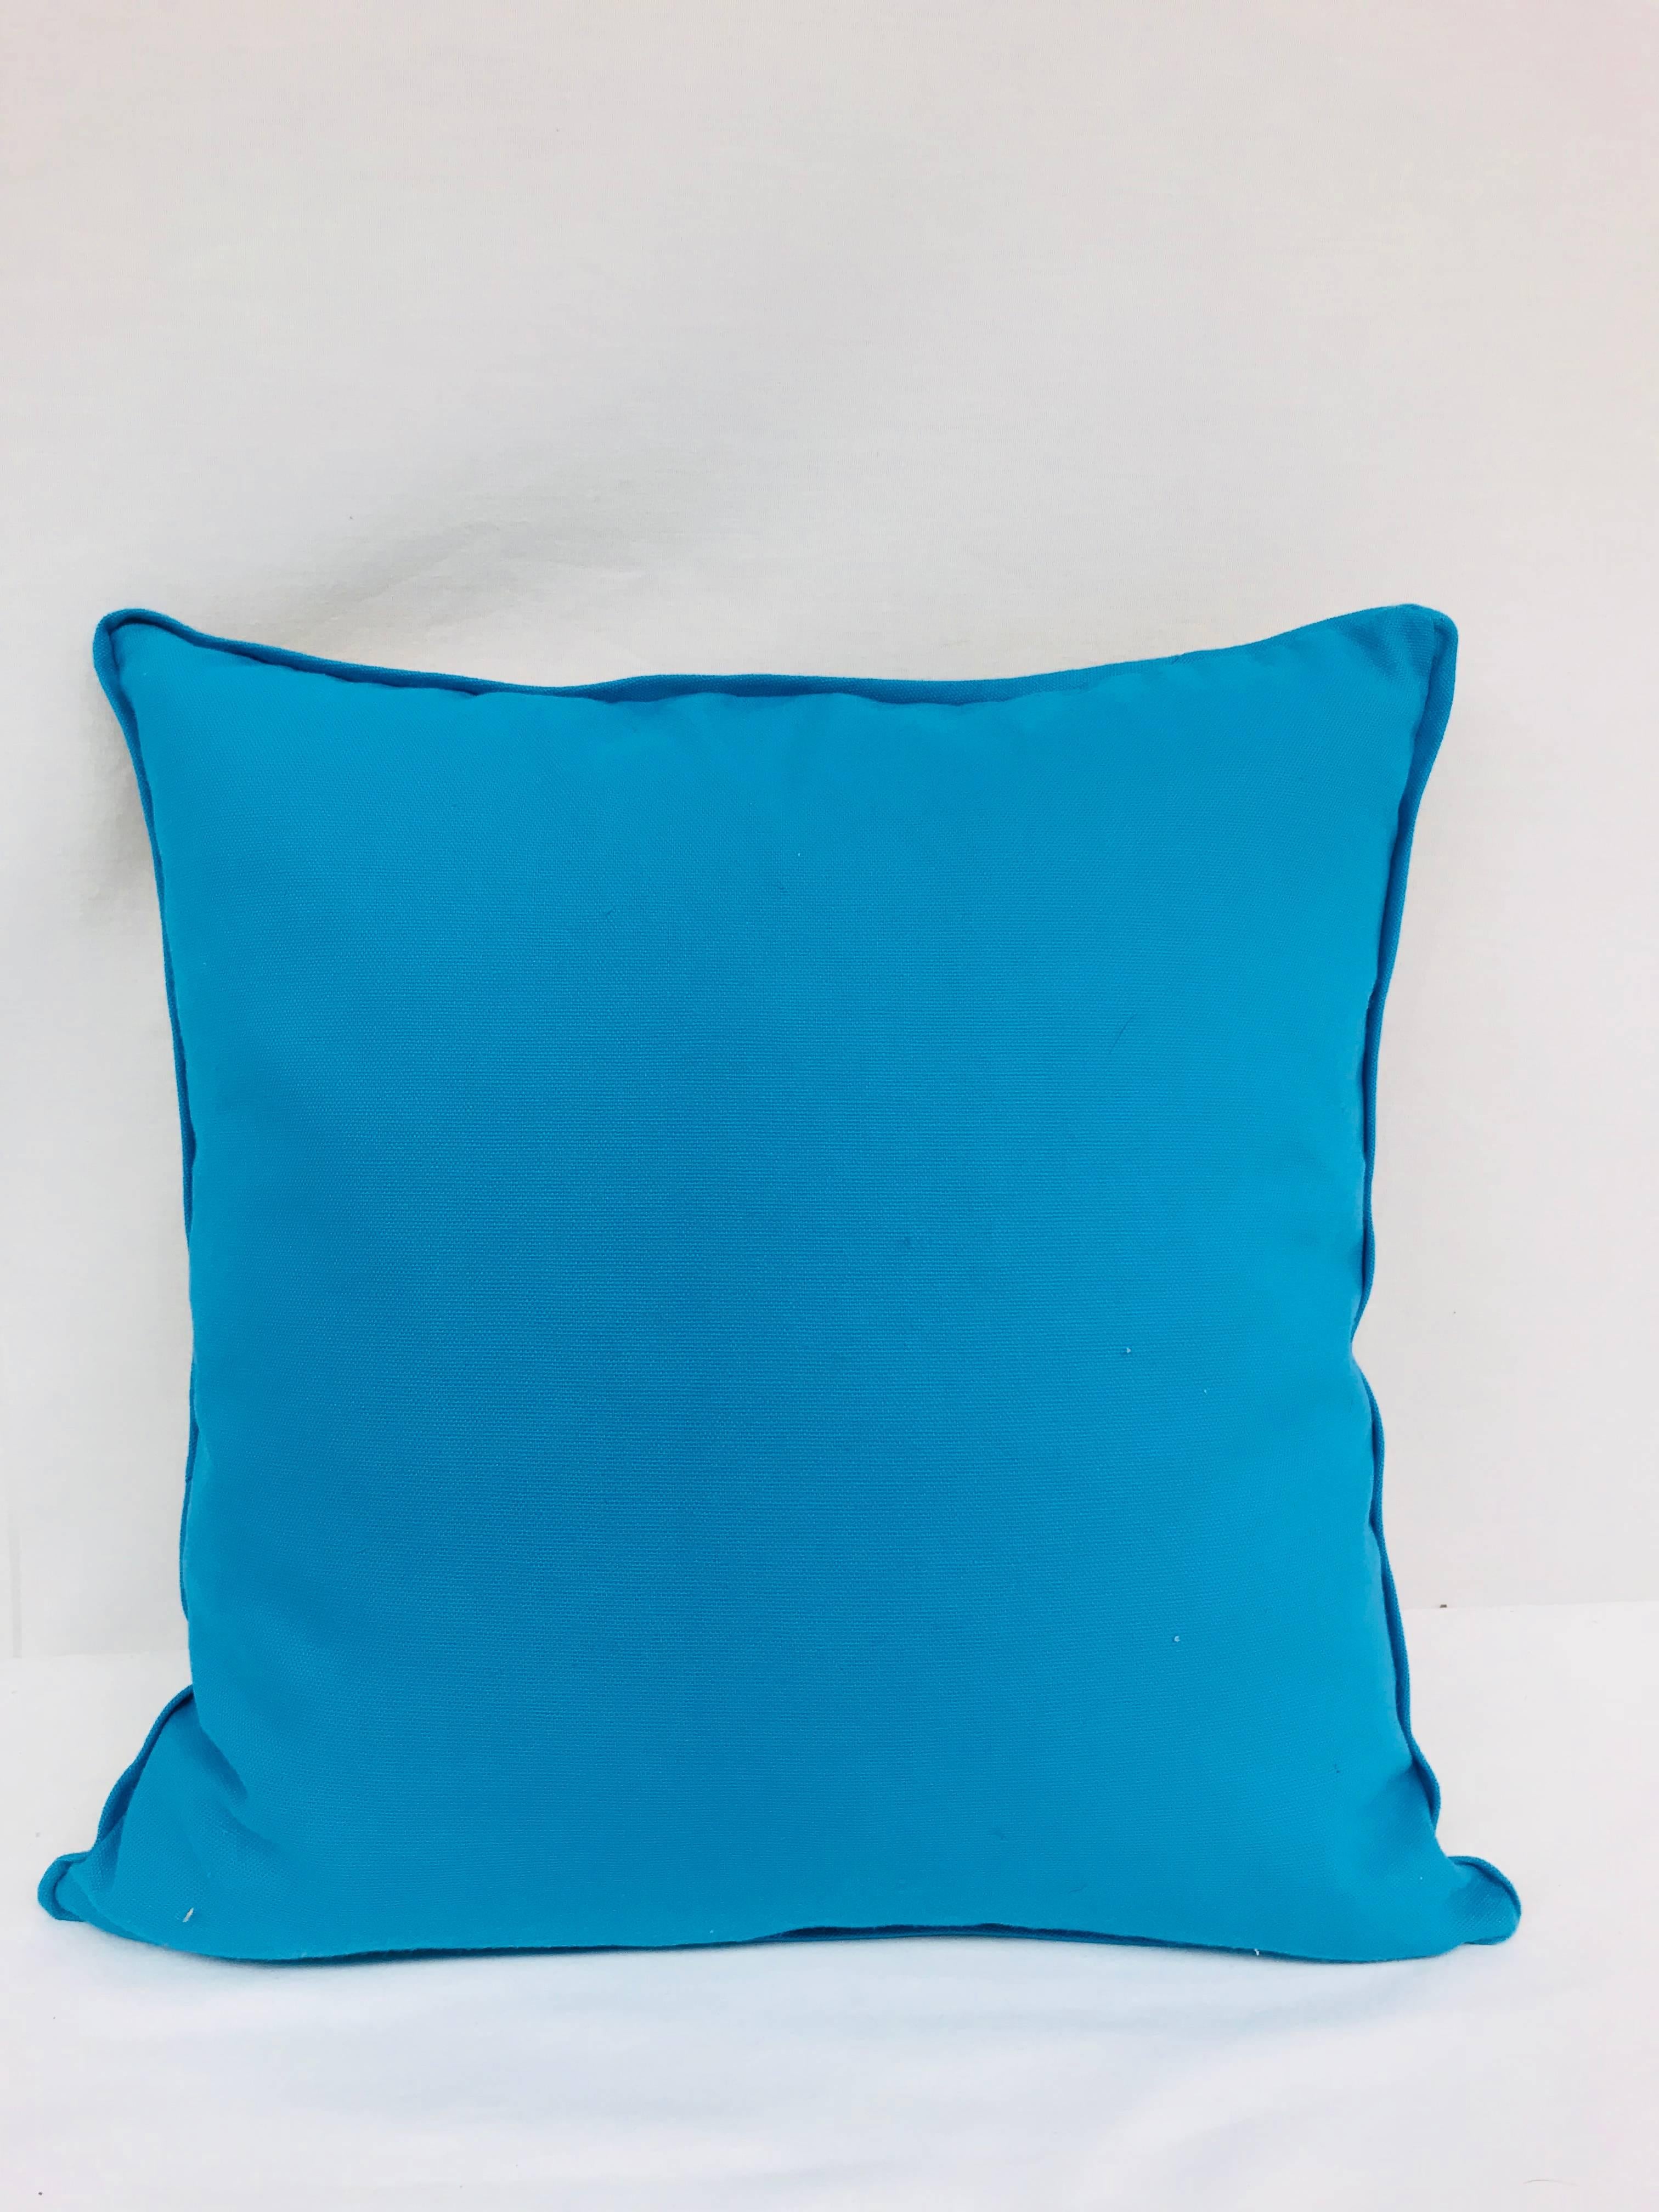 American Blue/Brown and Blue-Backed African Wax Print Pillow For Sale